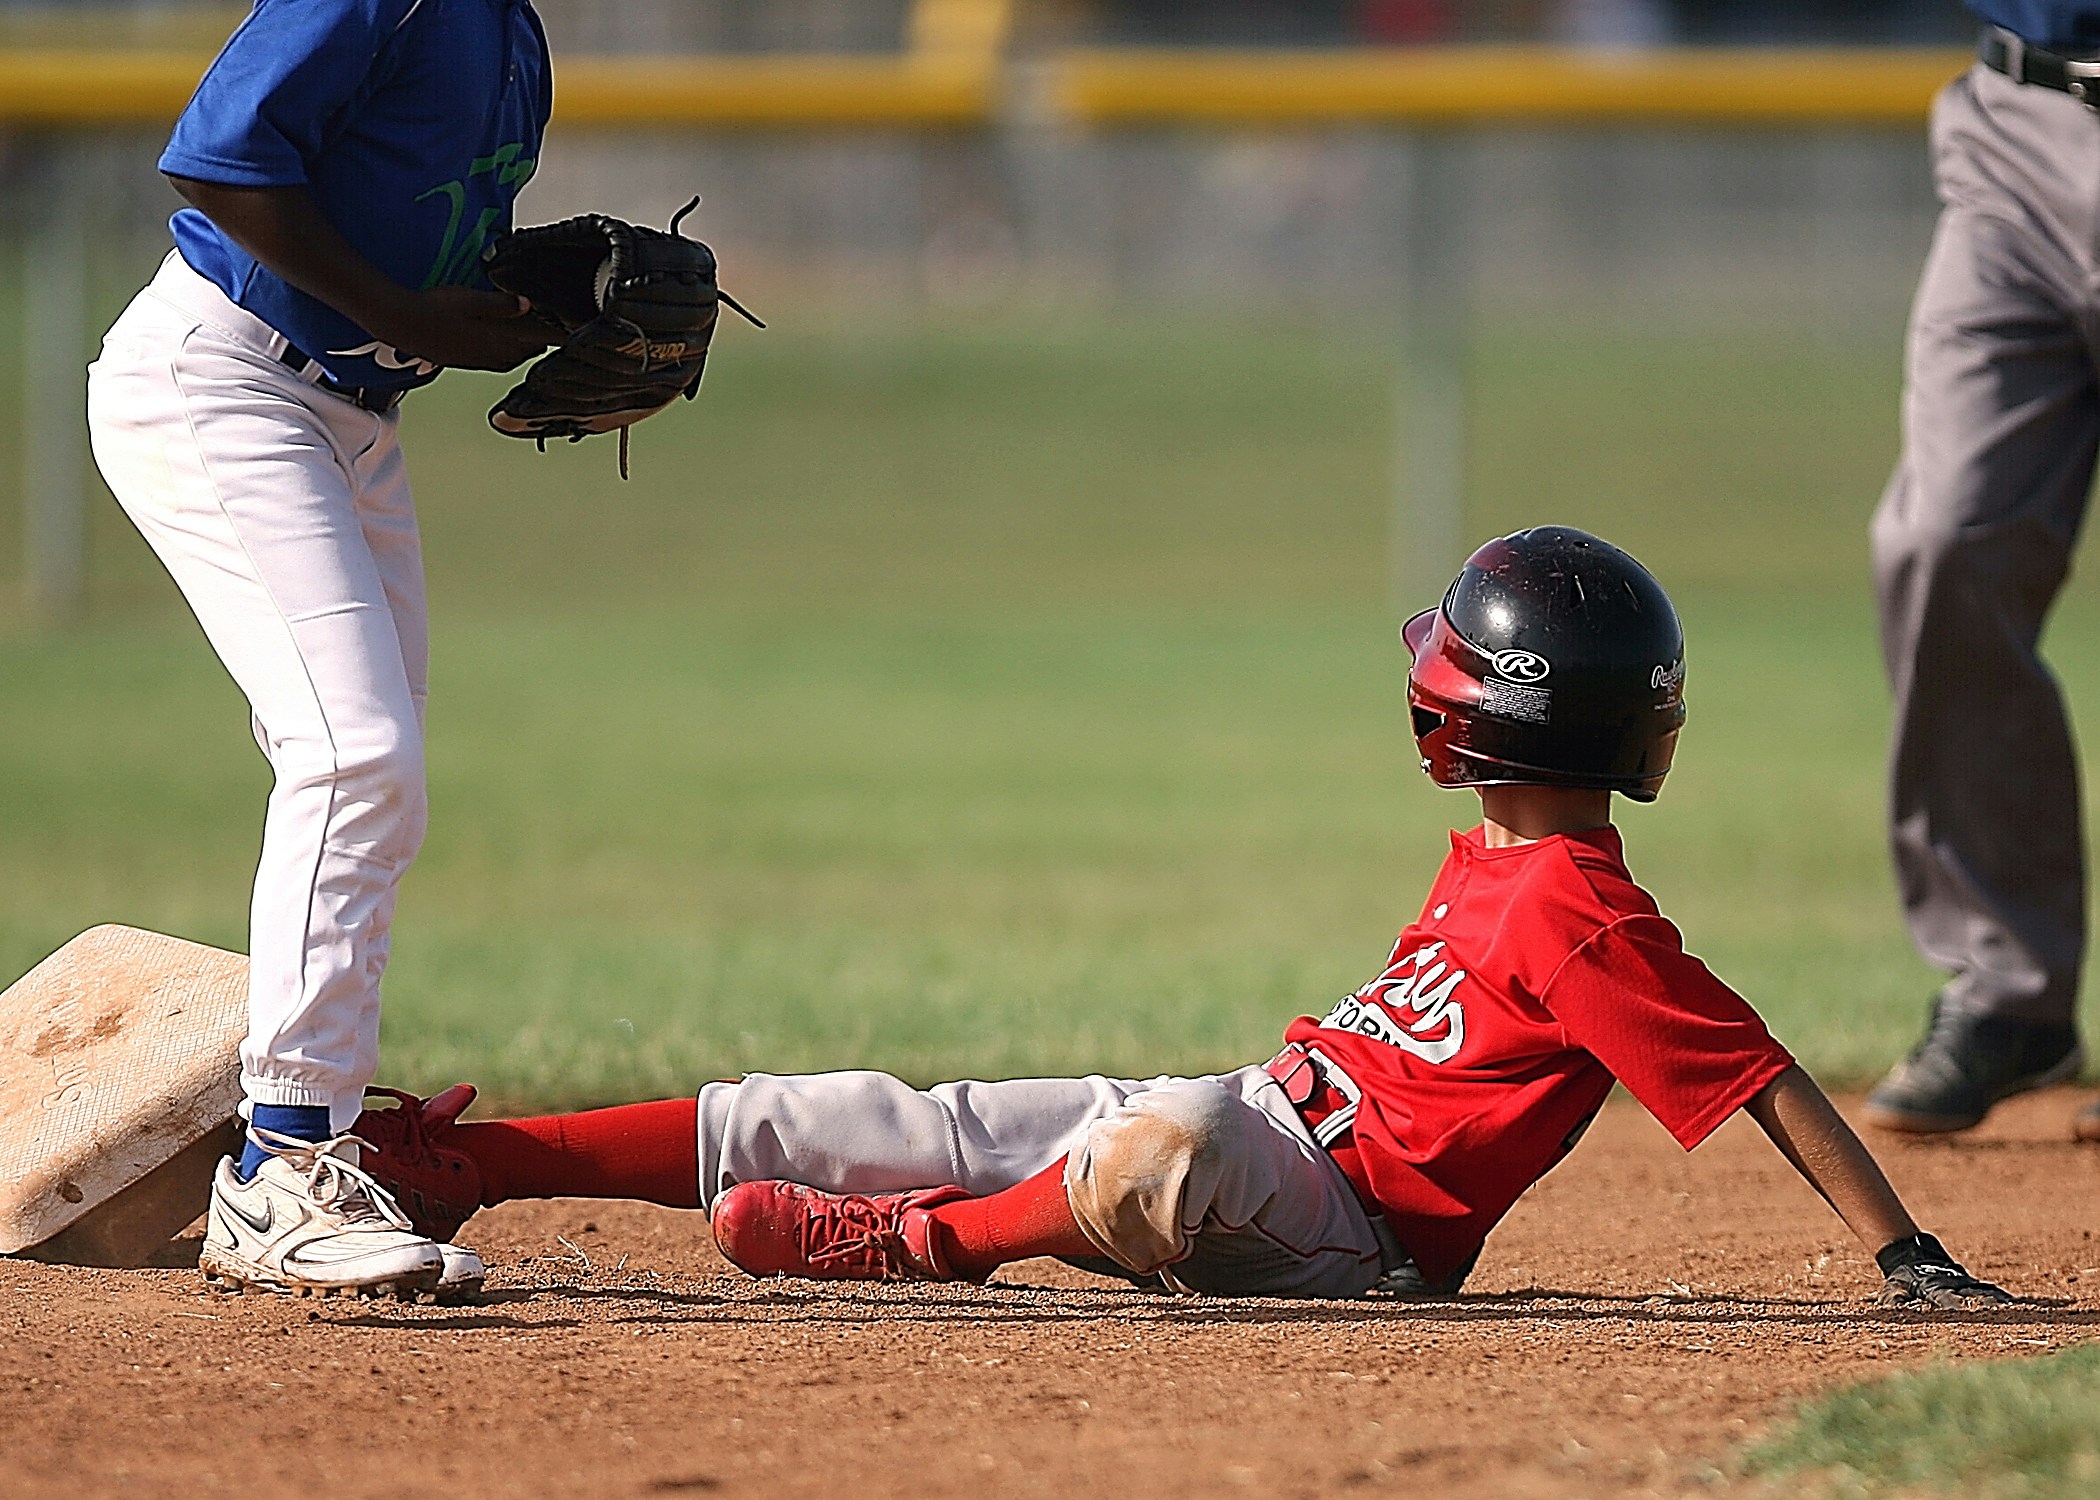 Little league ball player looks to the umpire for a ruling after sliding into second base.